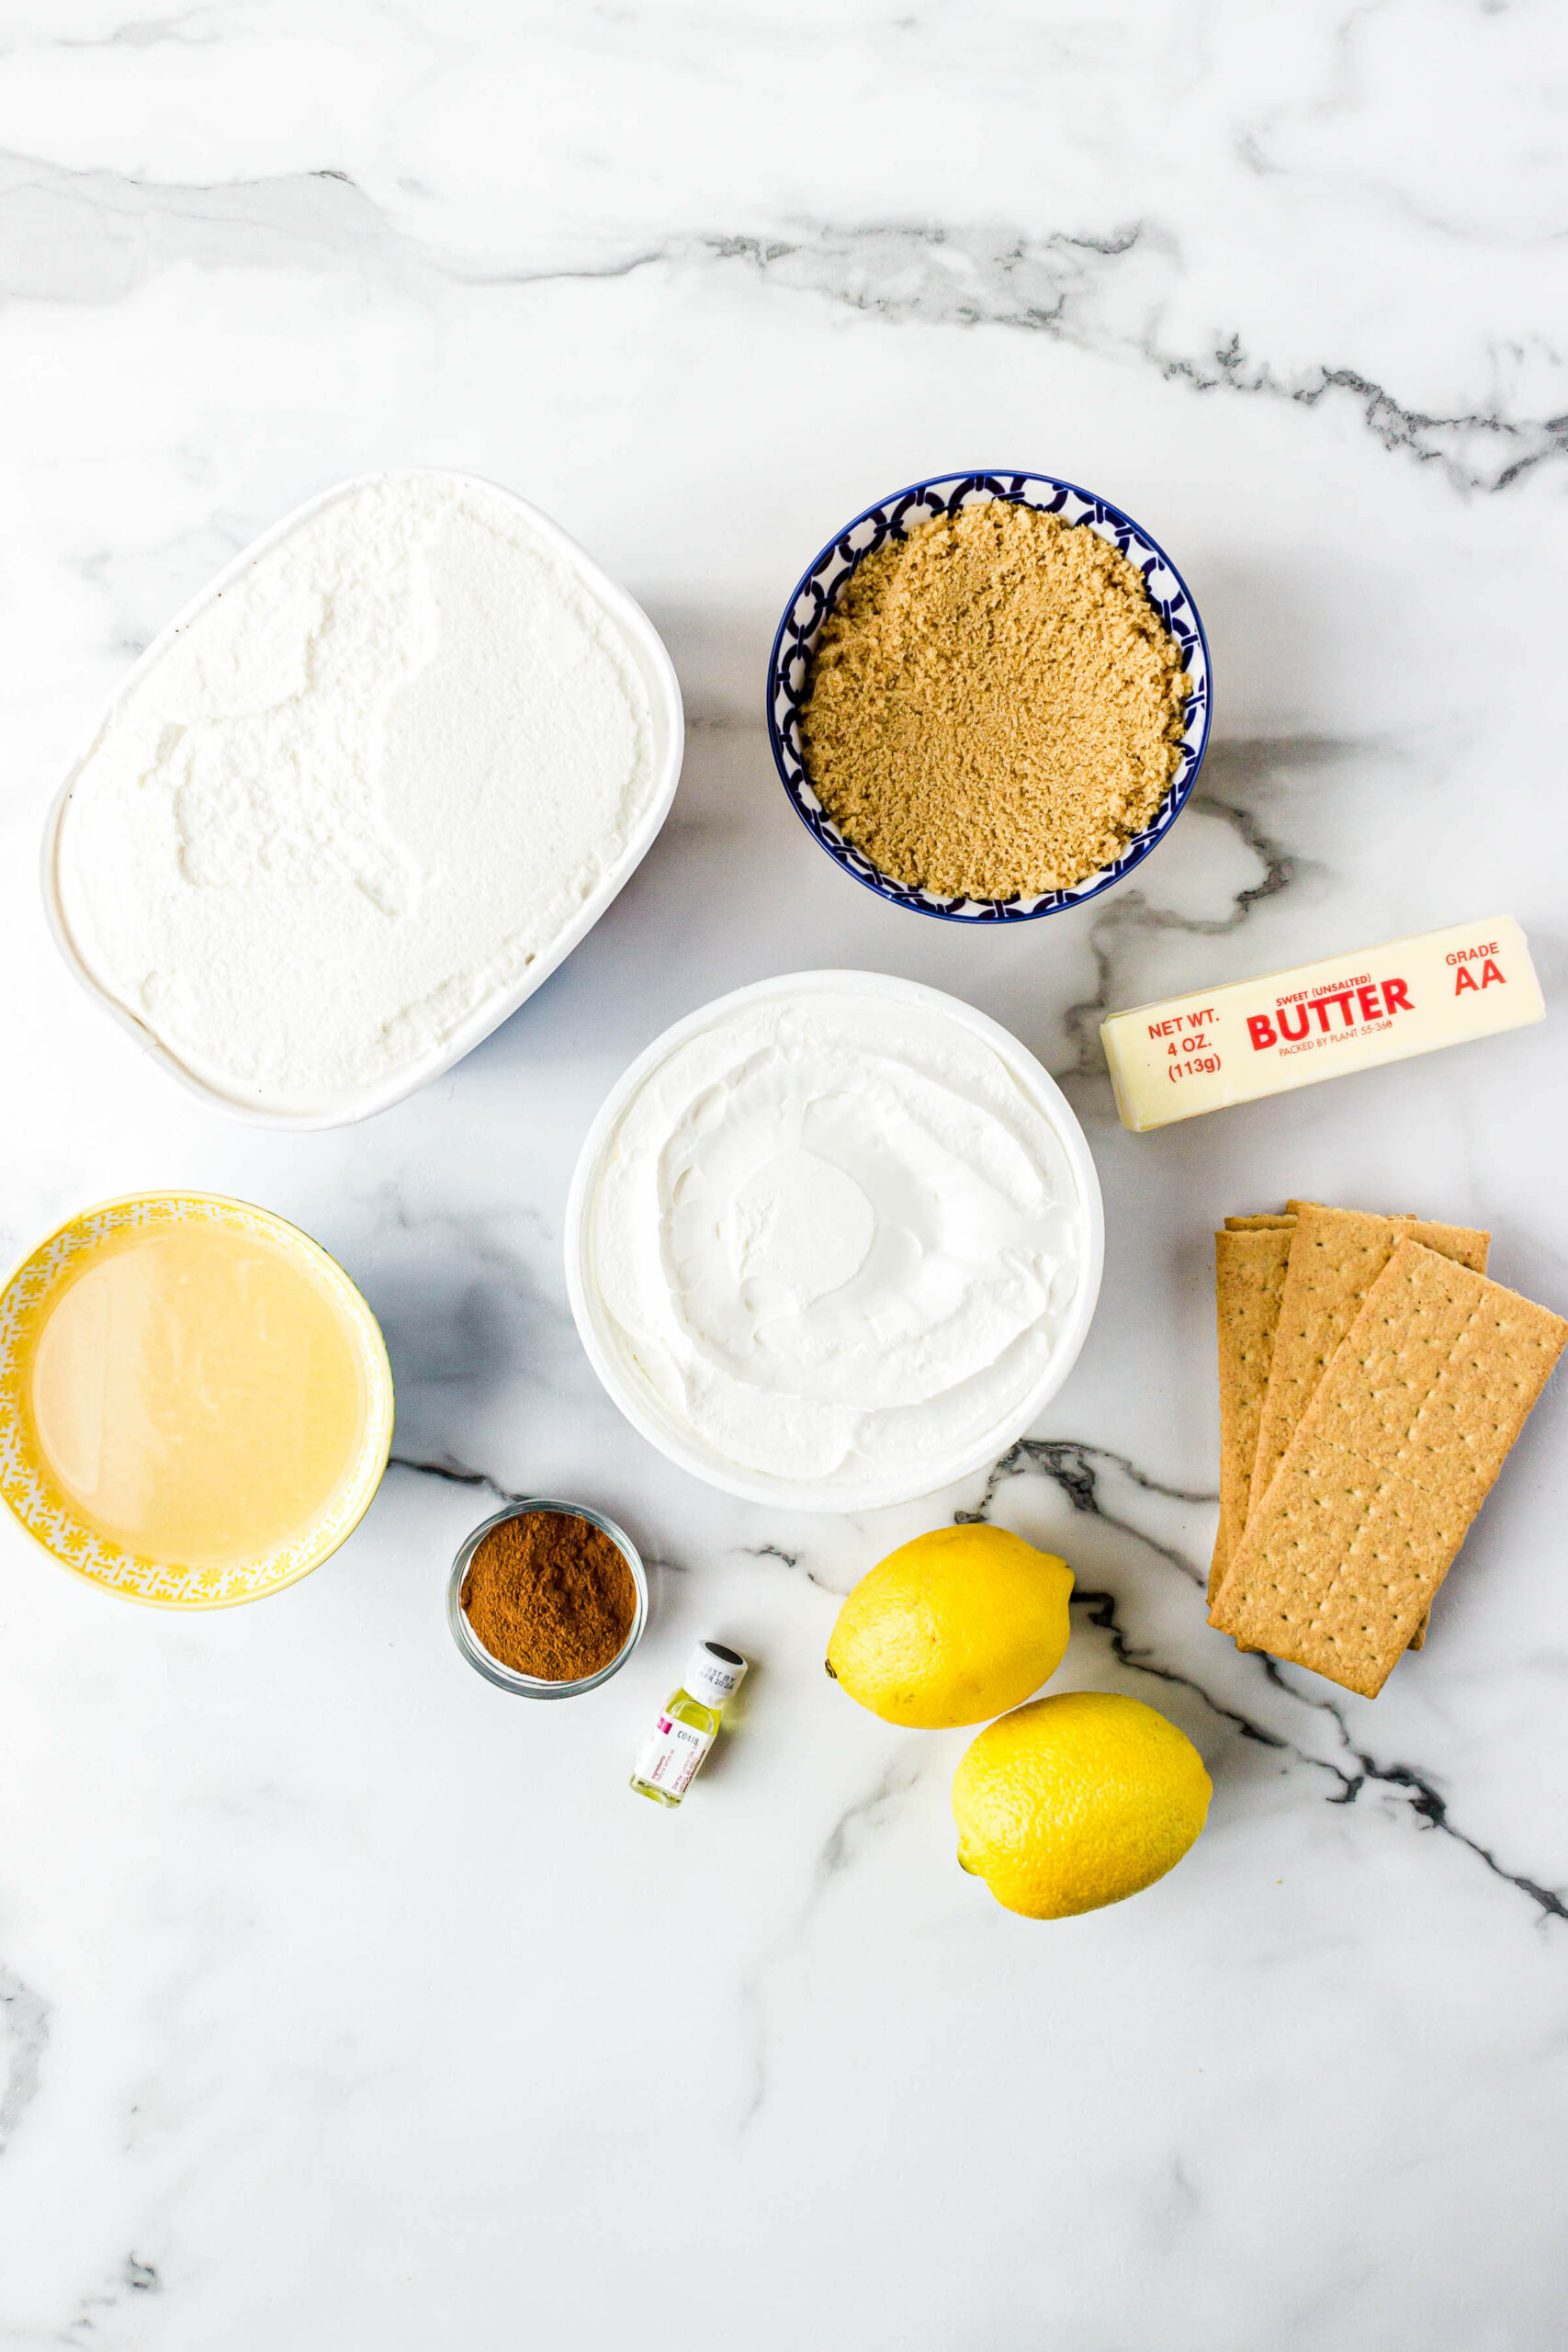 Lemons, jello, whipped cream and crust ingredients.